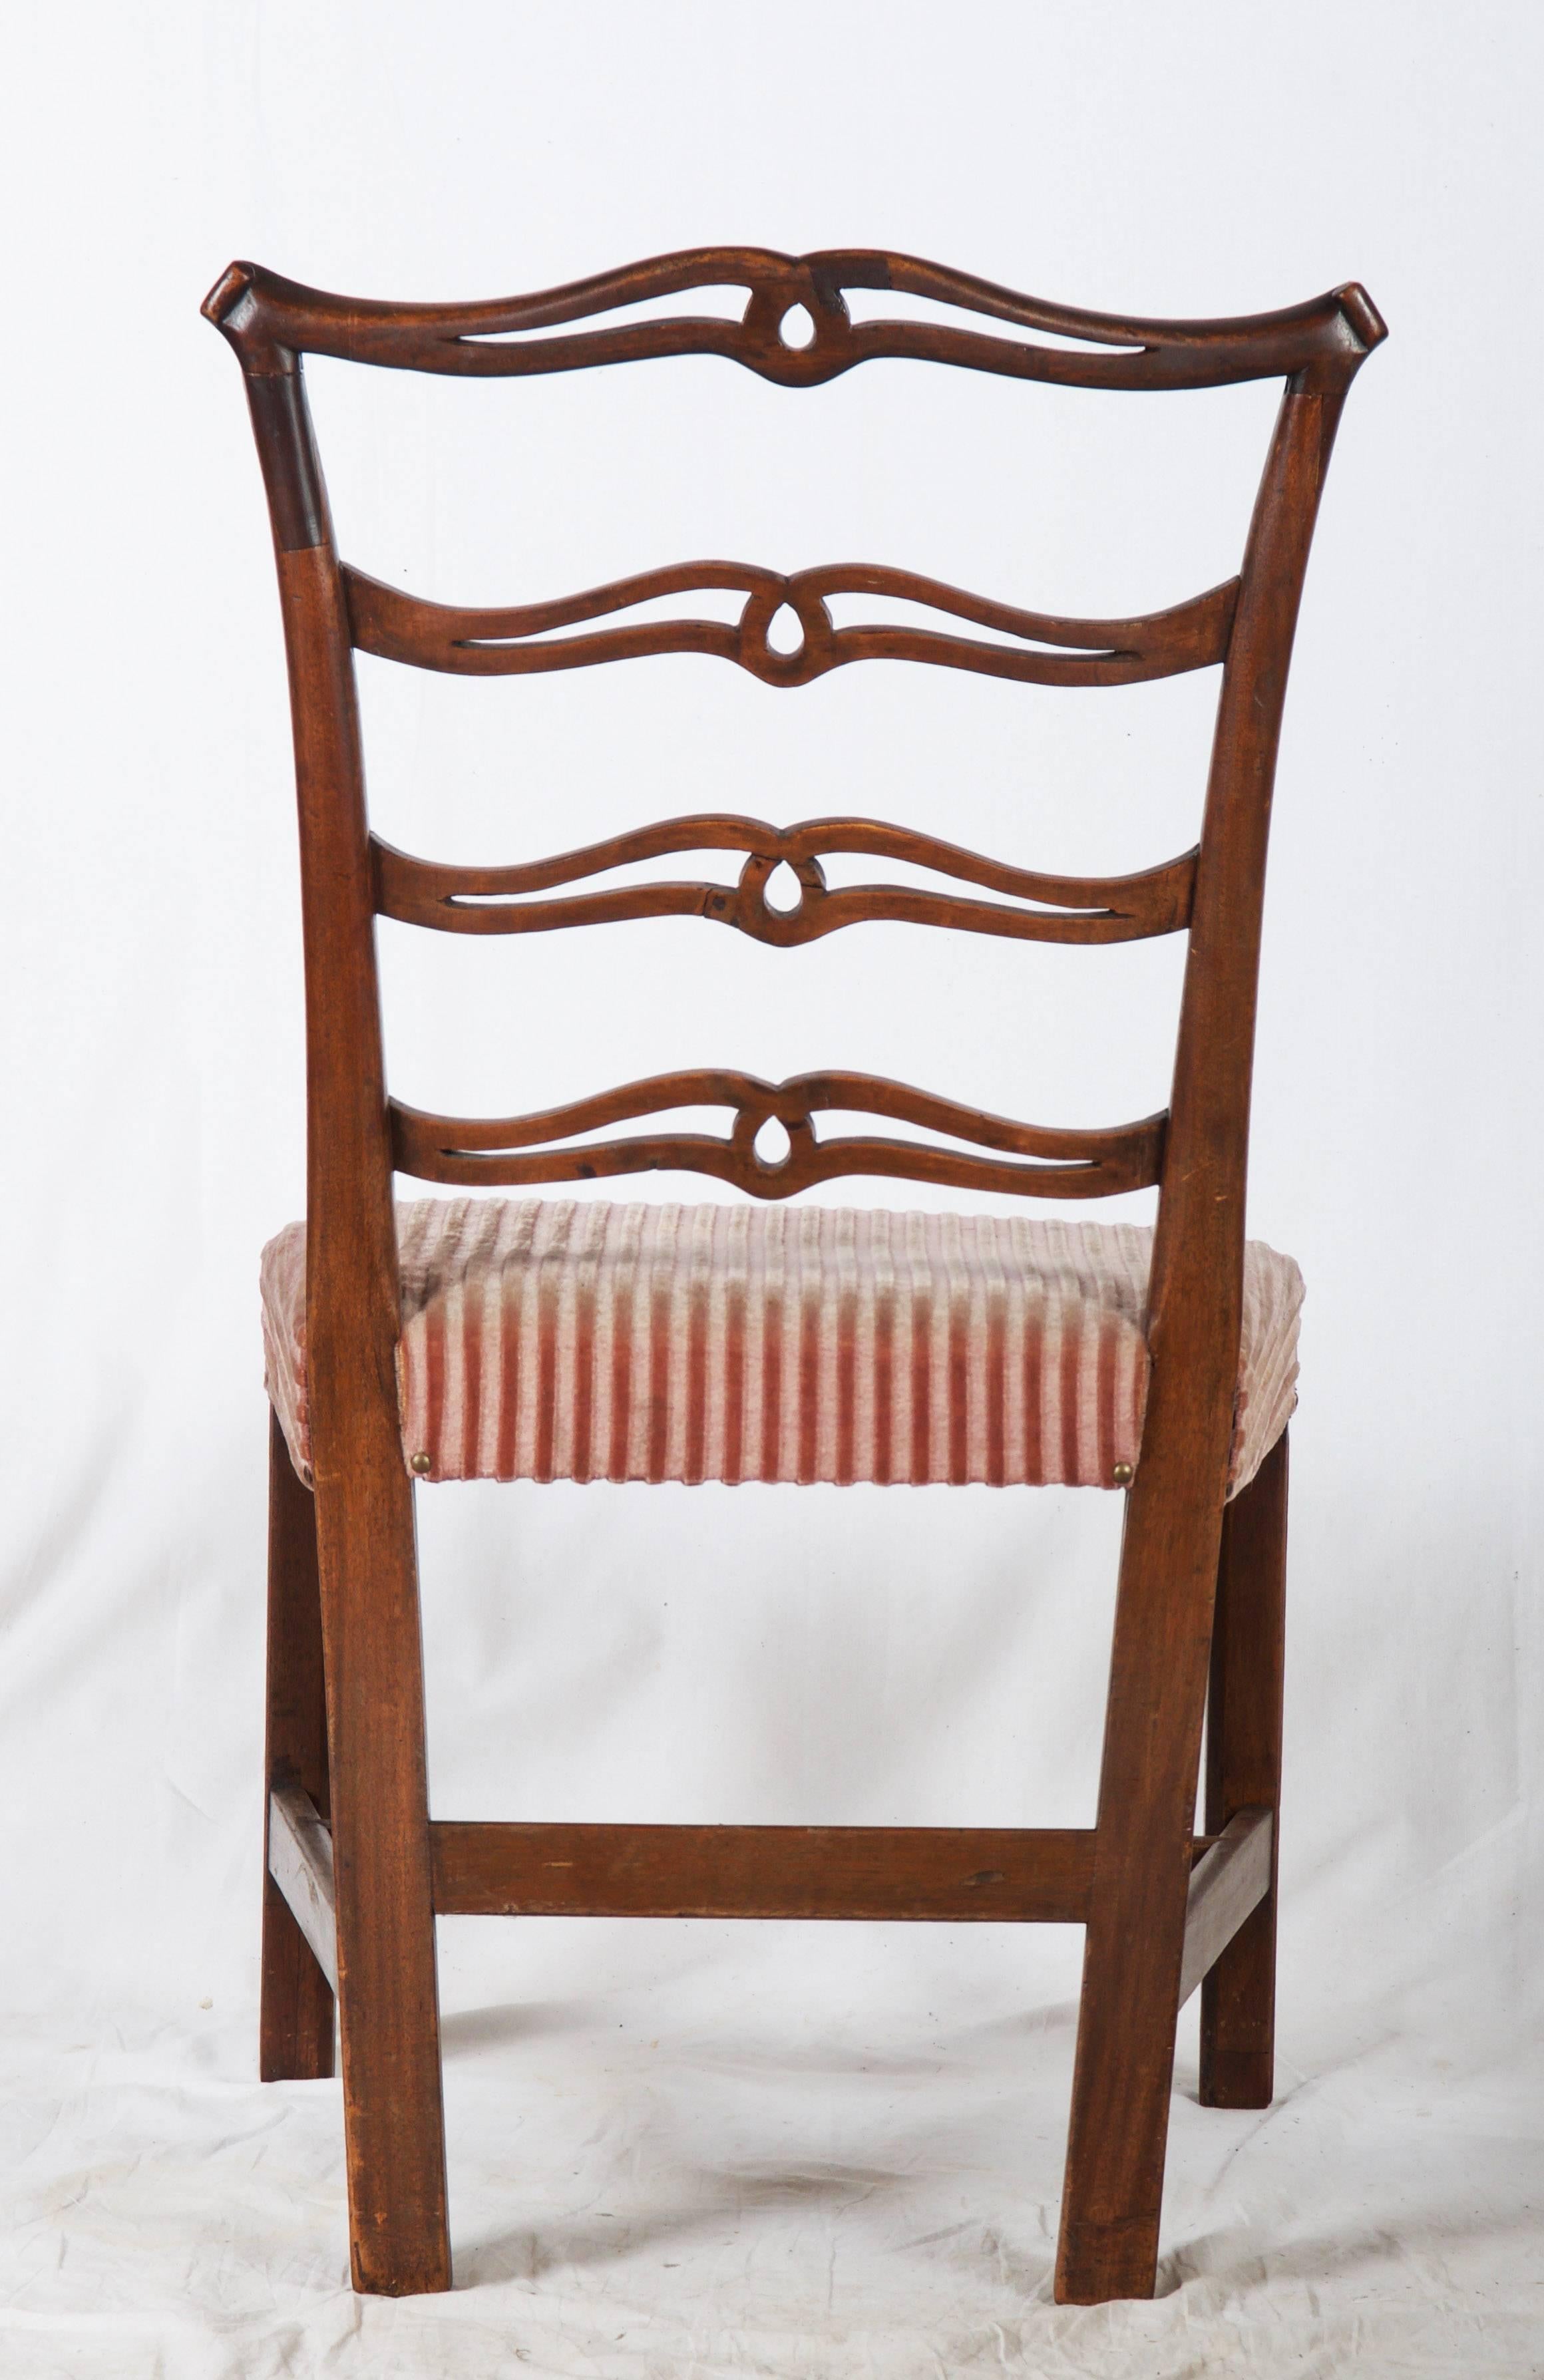 British Chippendale Carved Mahogany “Ribbon-Back” Side Chair